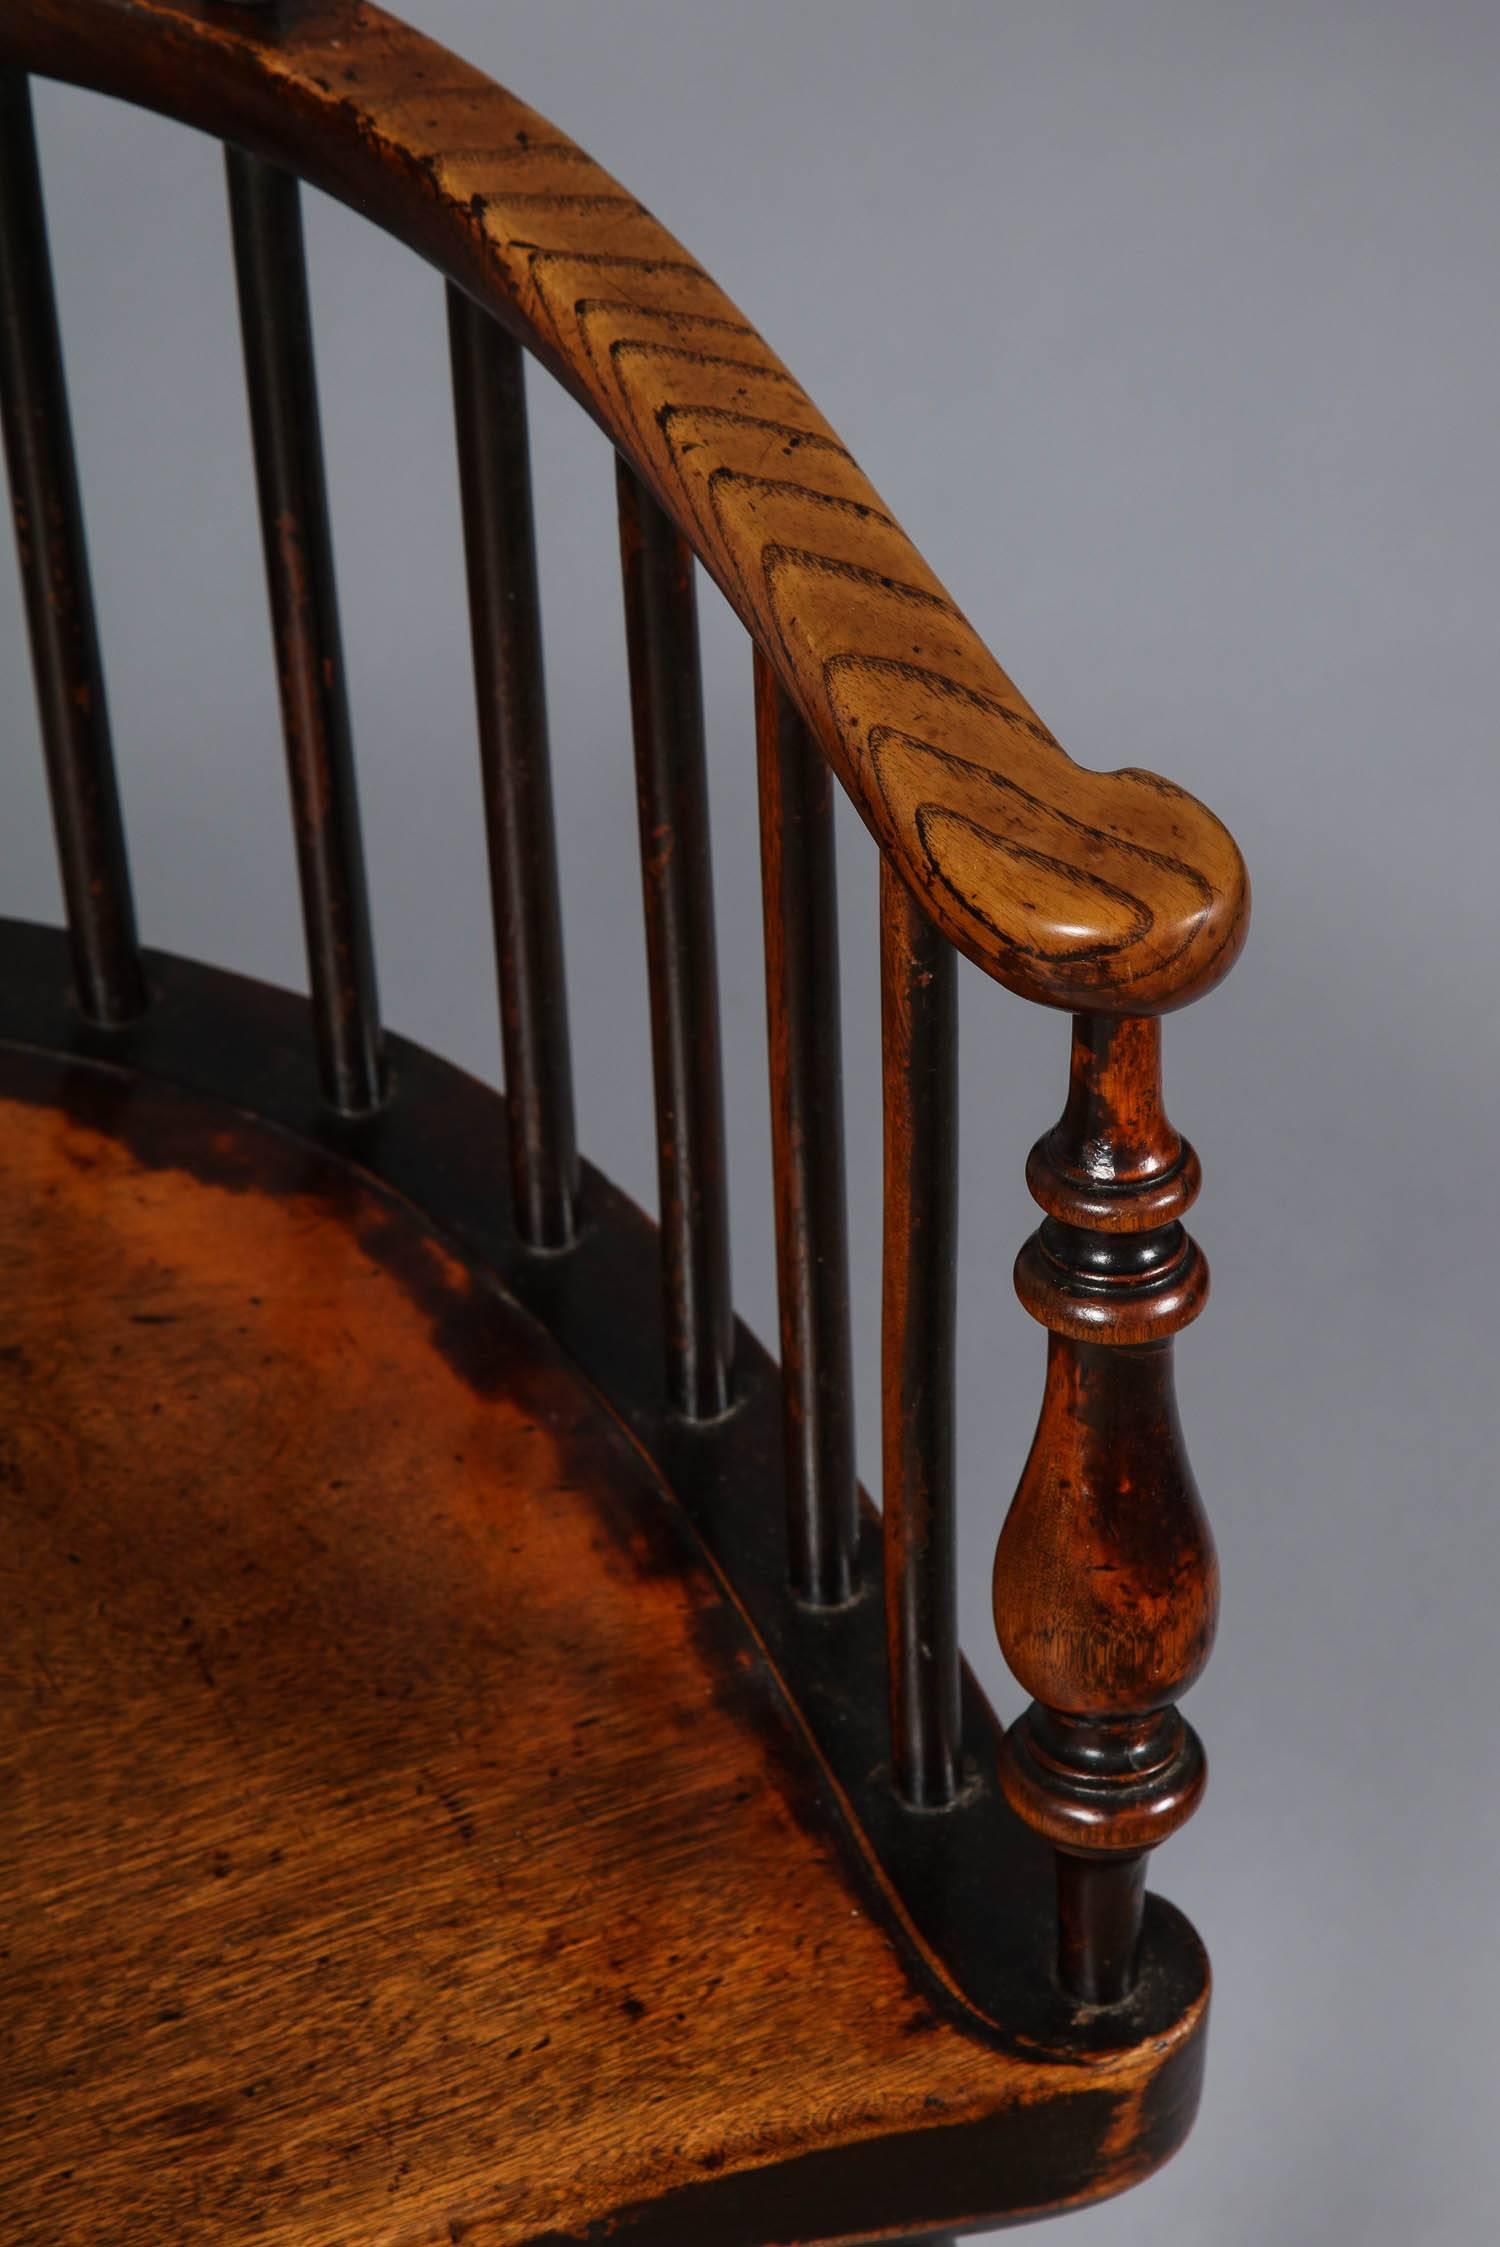 comb back windsor chair